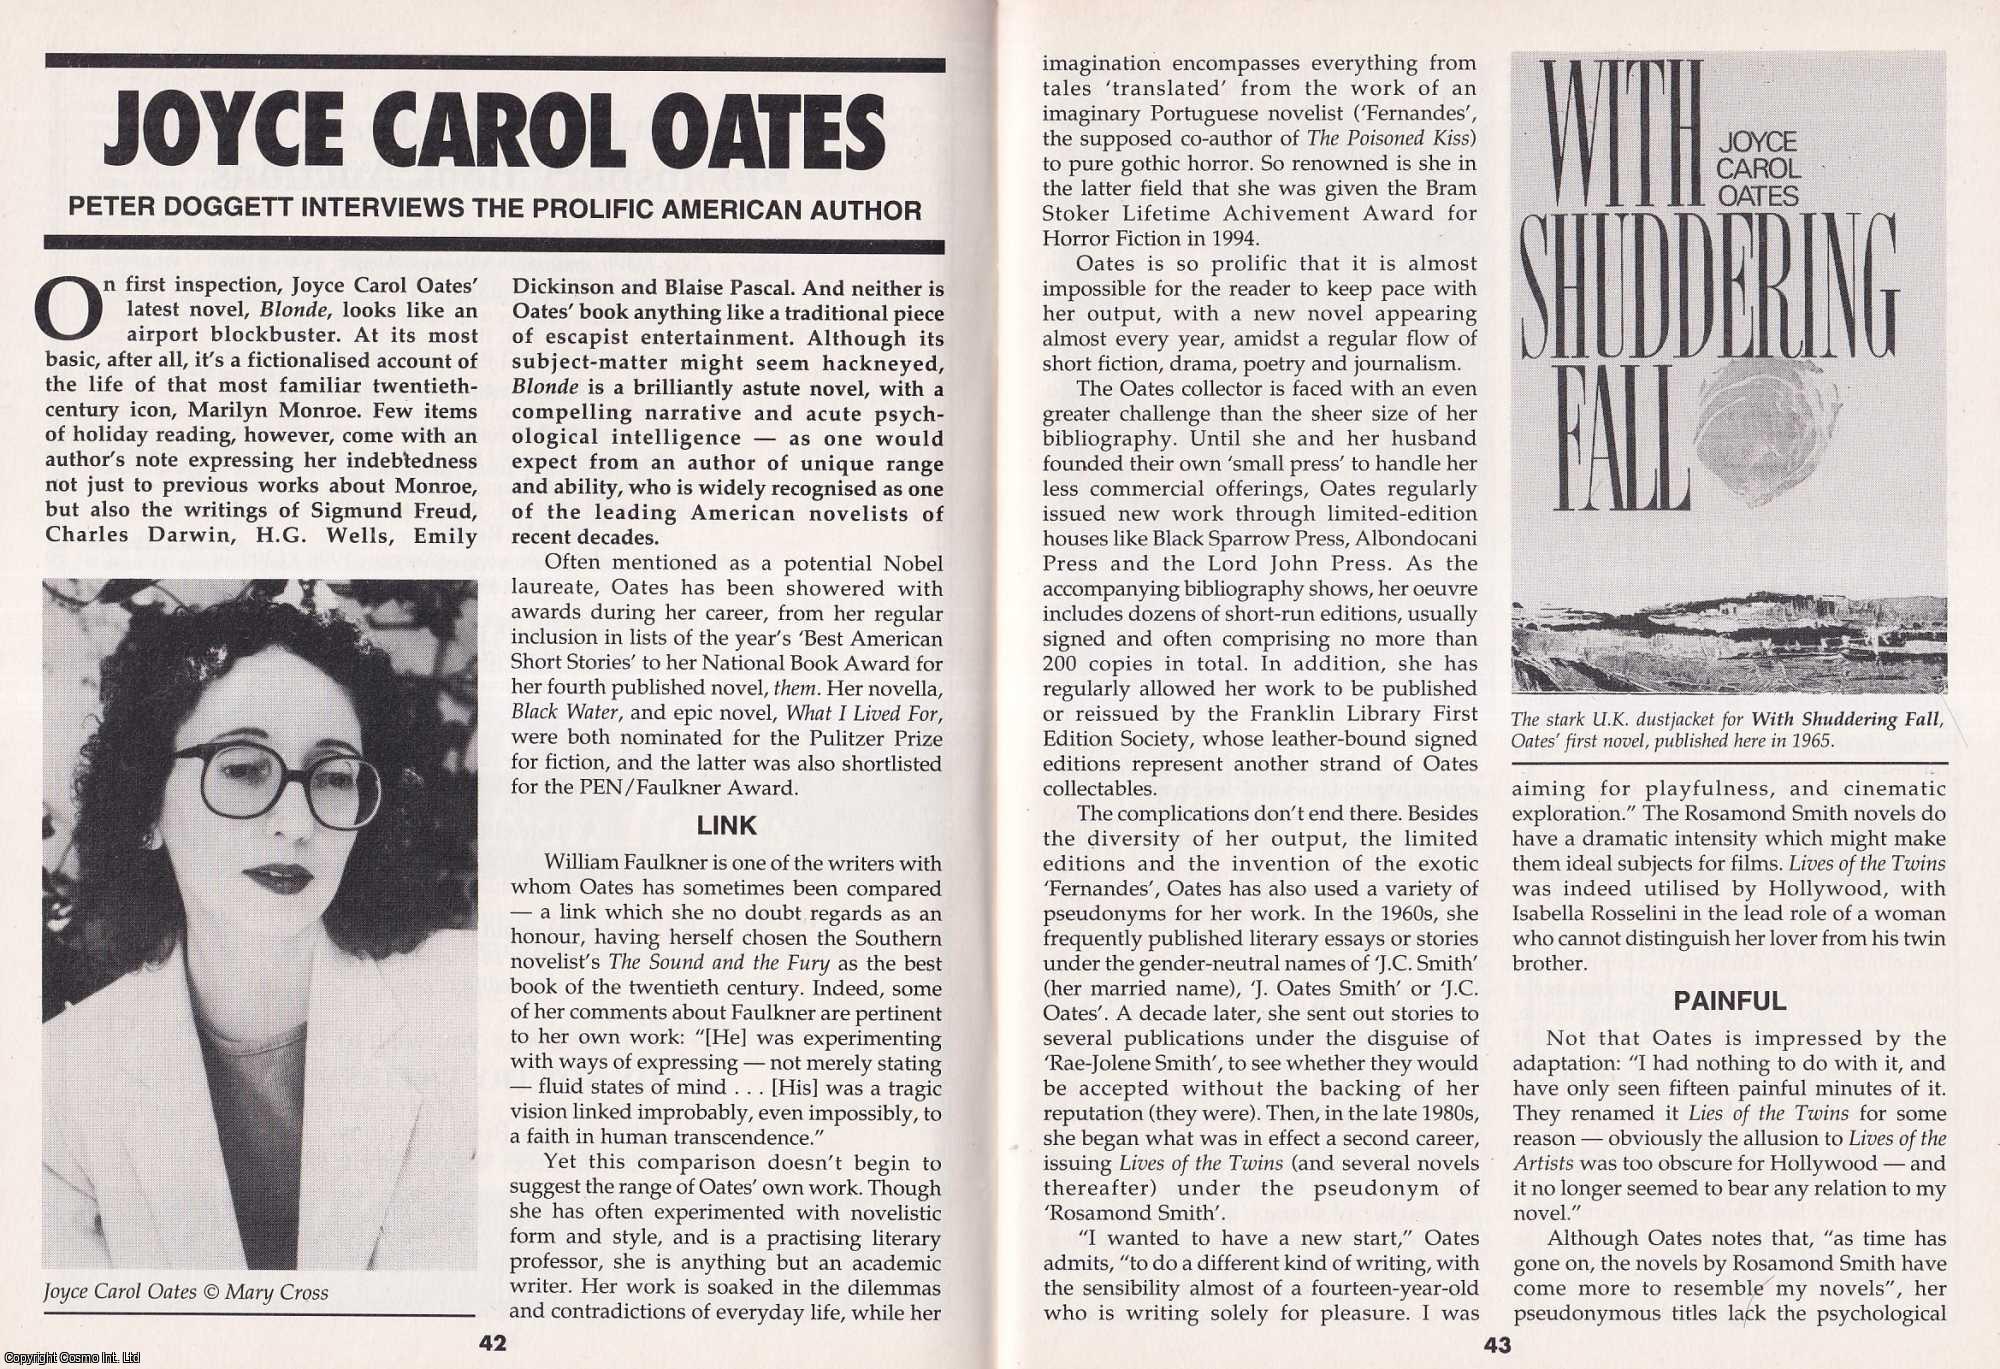 Peter Doggett - Joyce Carol Oates. Interviewing The Prolific American Author. This is an original article separated from an issue of The Book & Magazine Collector publication.